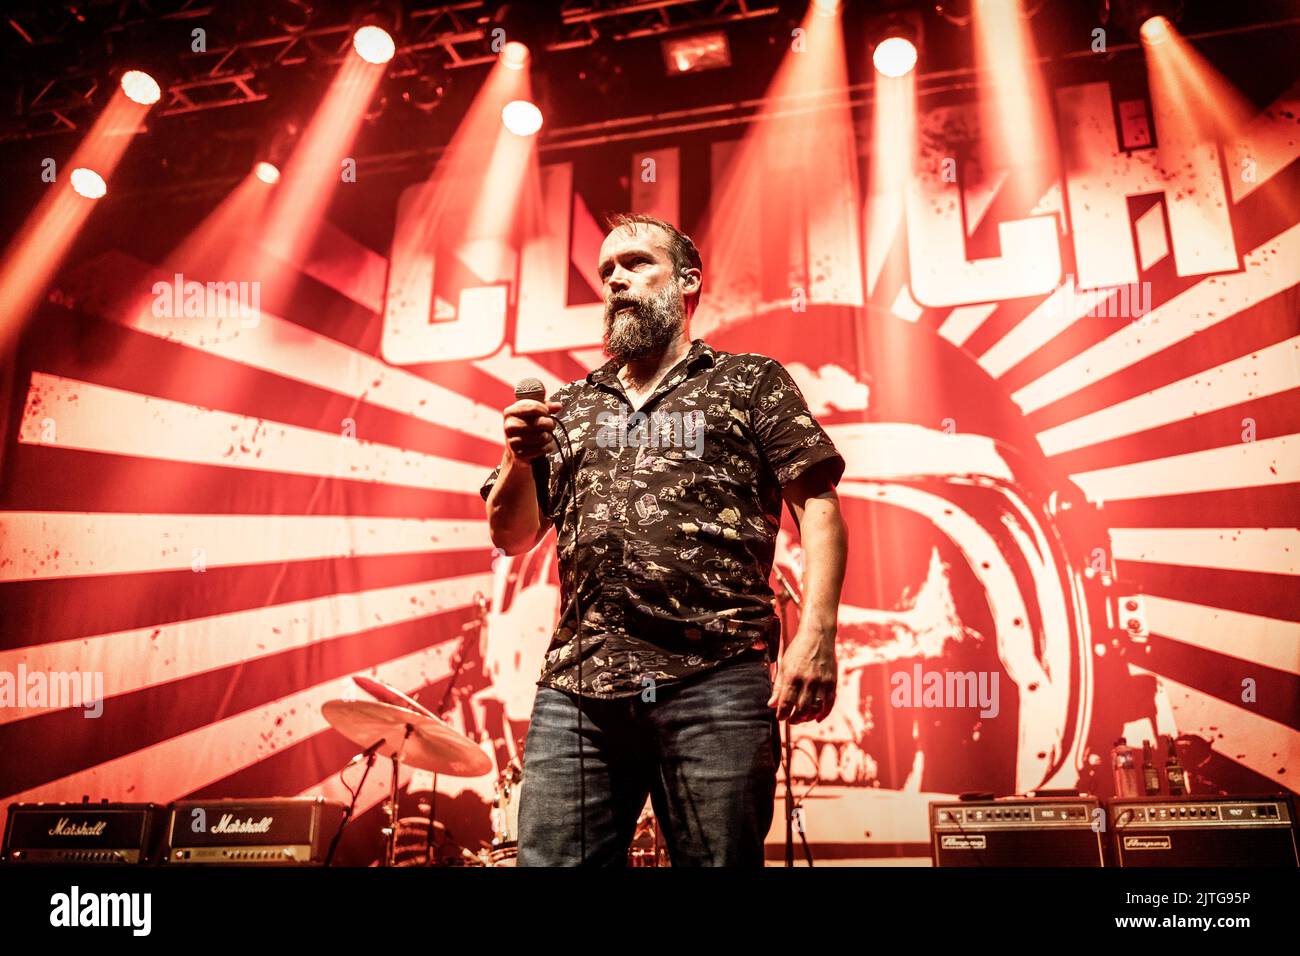 Oslo, Norway. 24th, August 2022. The American rock band Clutch performs a live concert at Sentrum Scene in Oslo. Here singer Neil Fallon is seen live on stage. (Photo credit: Gonzales Photo - Terje Dokken). Stock Photo